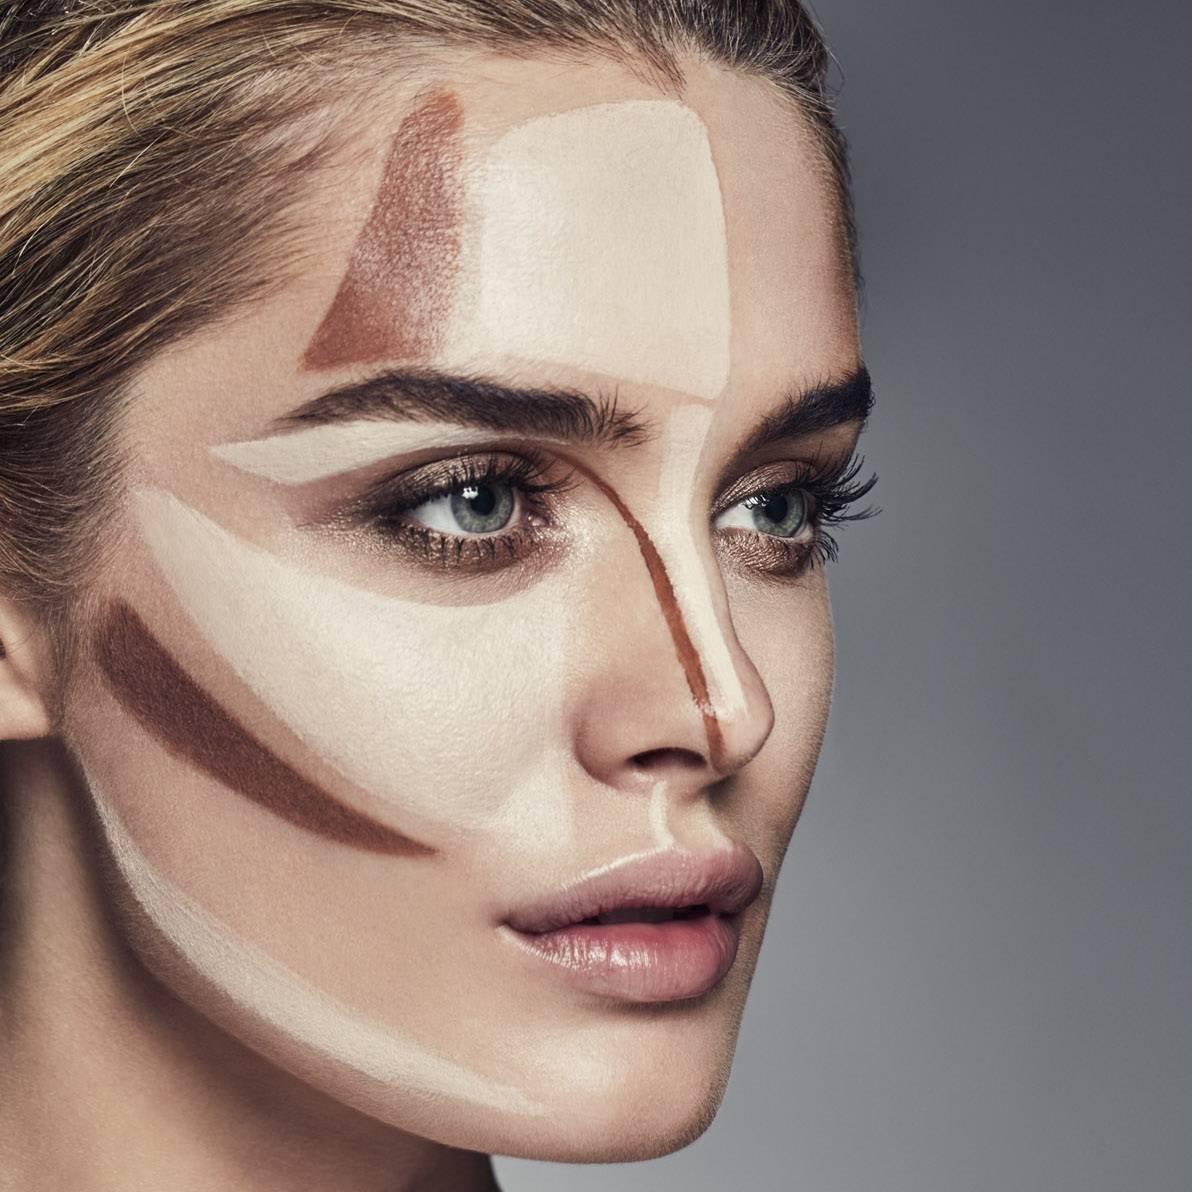 Here's How To Get The Most Perfect Contour With an Every Day